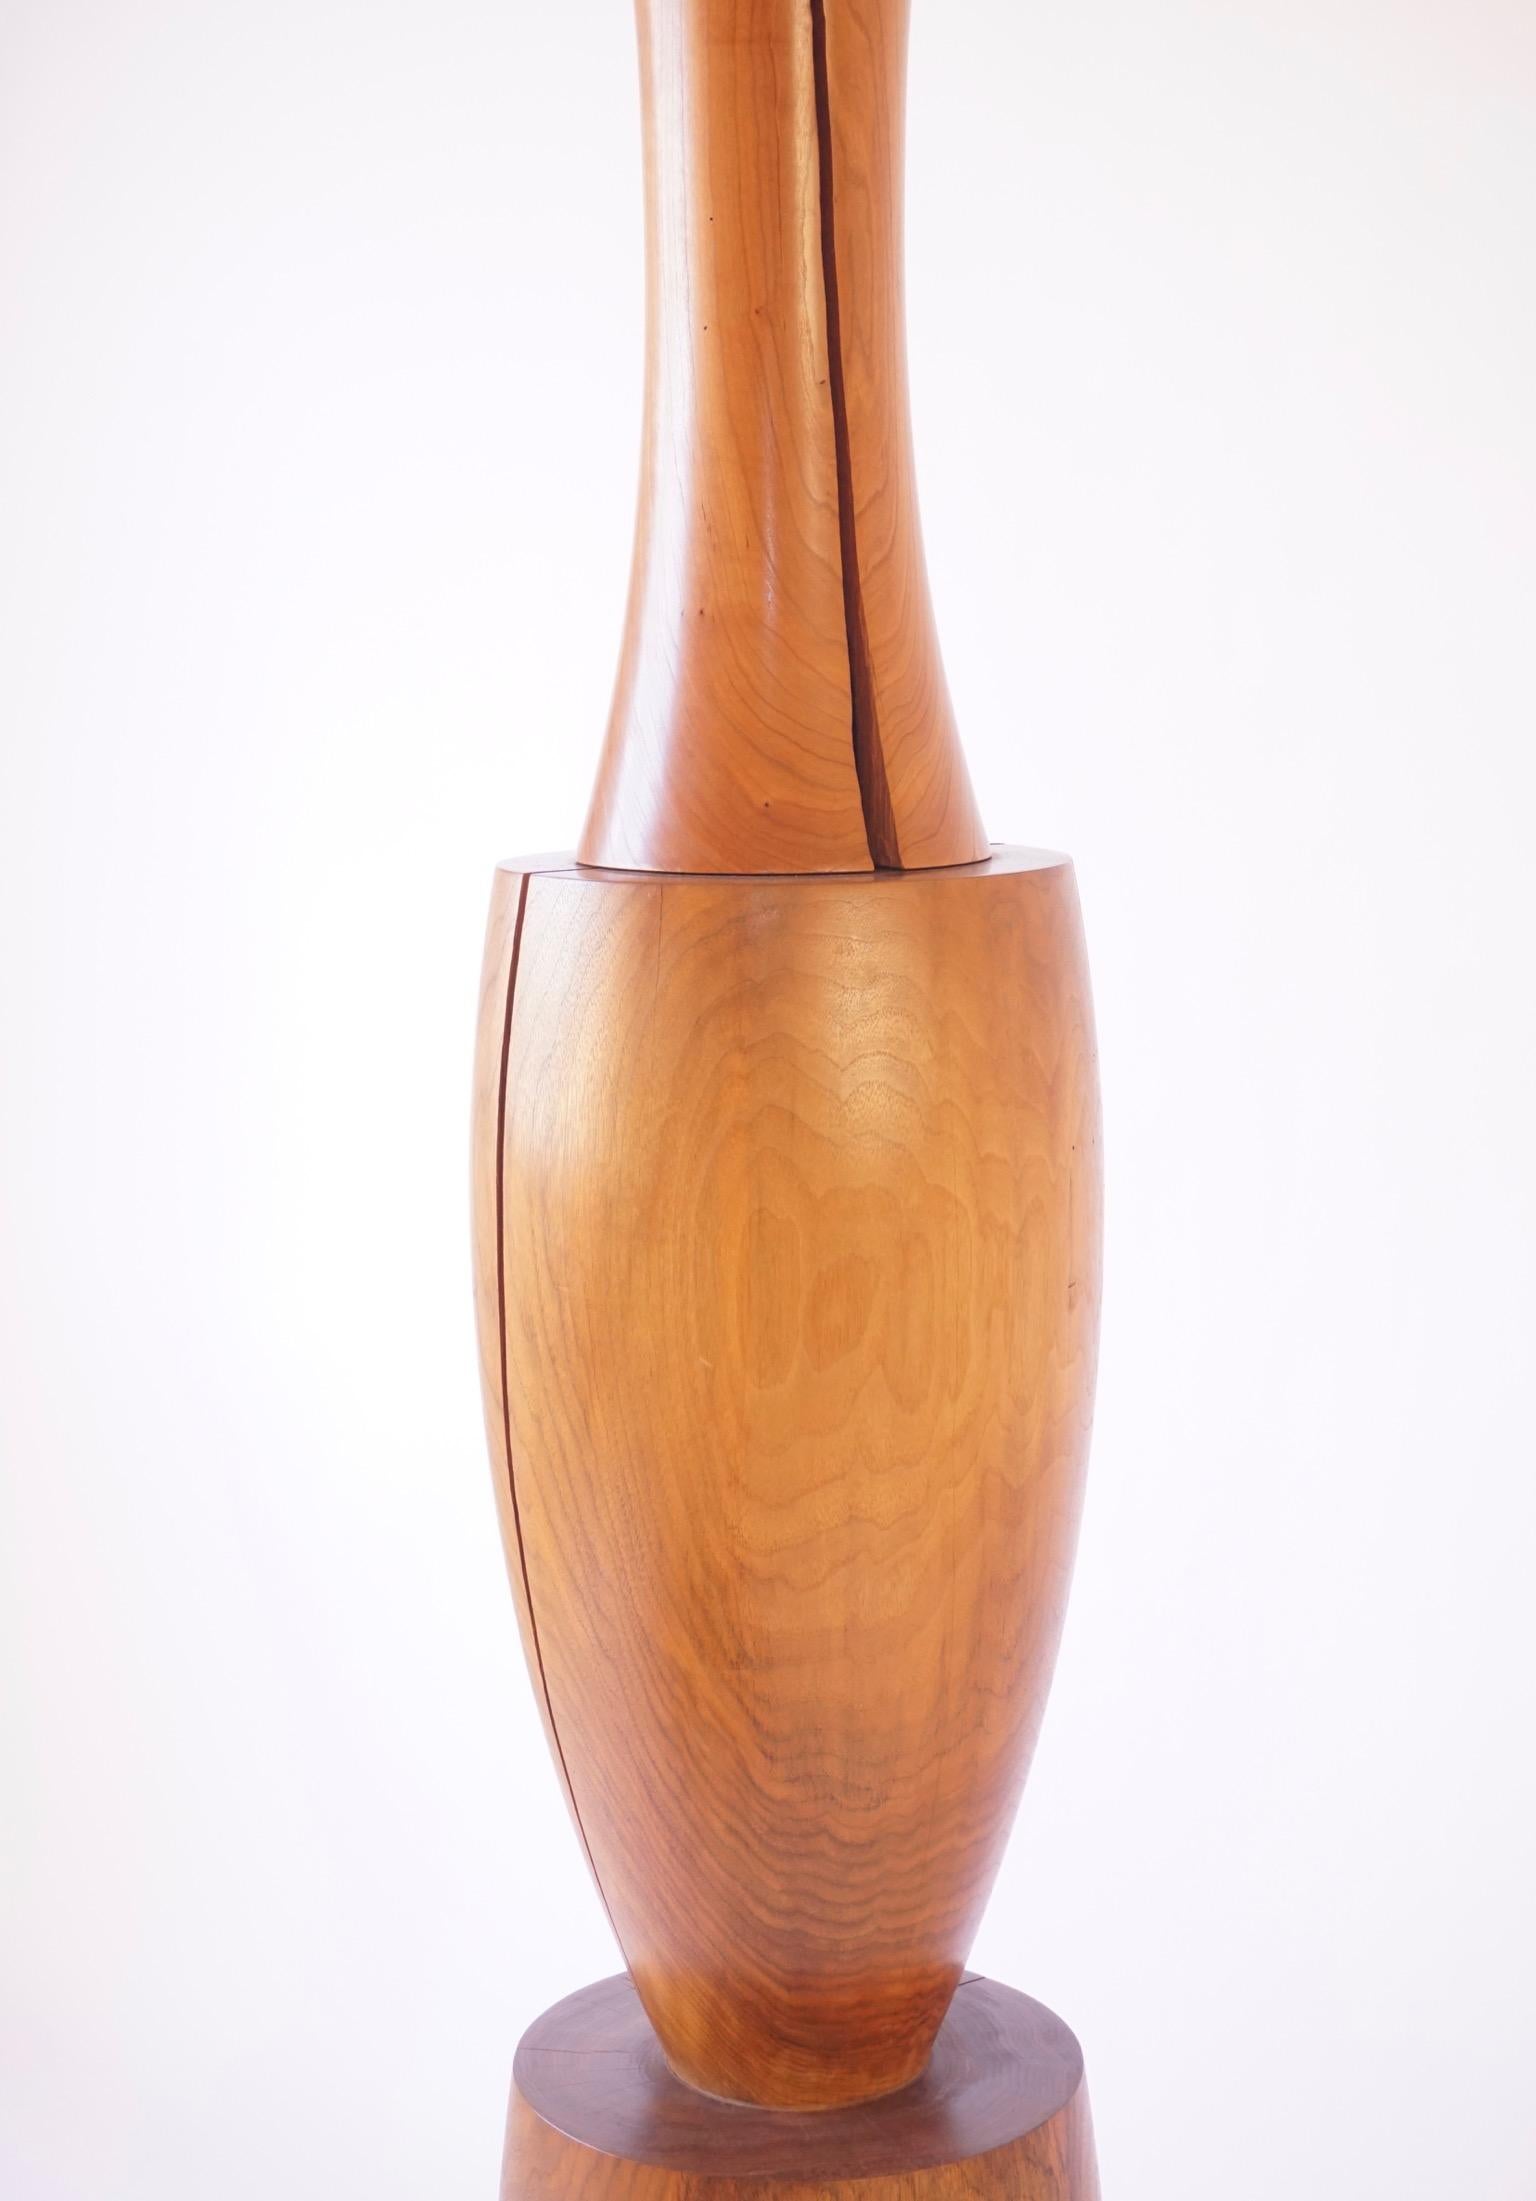 American Turned Sculptural Wooden TOTEM #2 by Chris Lehrecke For Sale